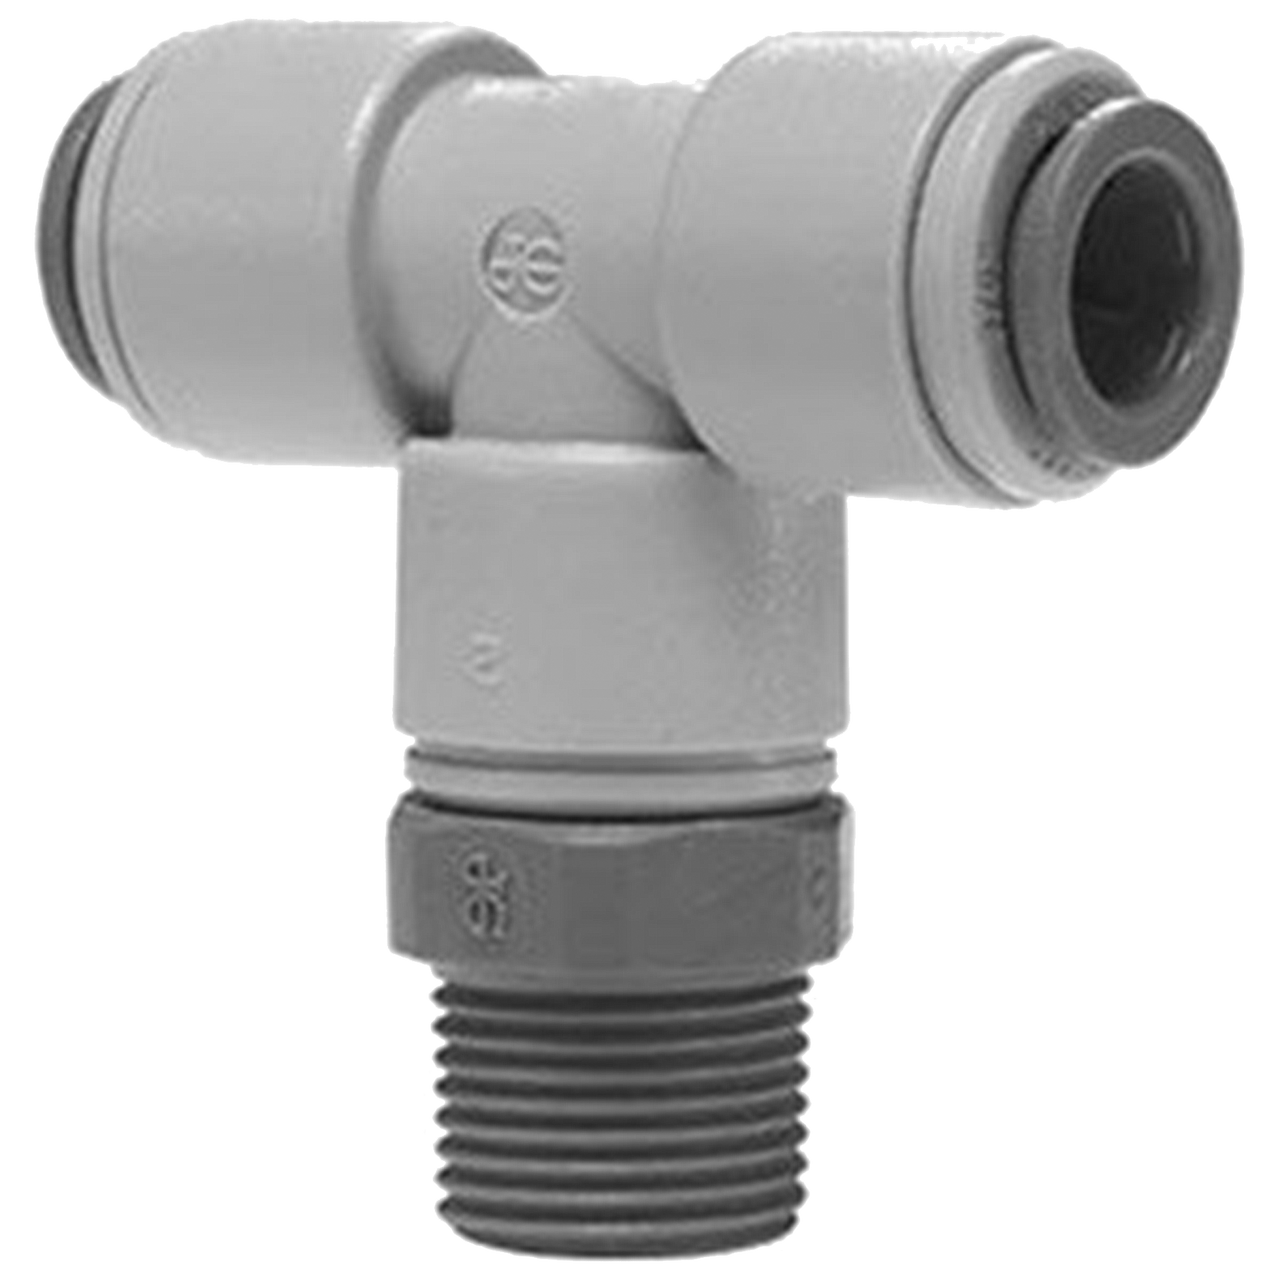 3/8 x 3/8 x 1/4" JG® Grey Acetal Push-To-Connect - Push-To-Connect - Male NPT Swivel Tee  PI101222S